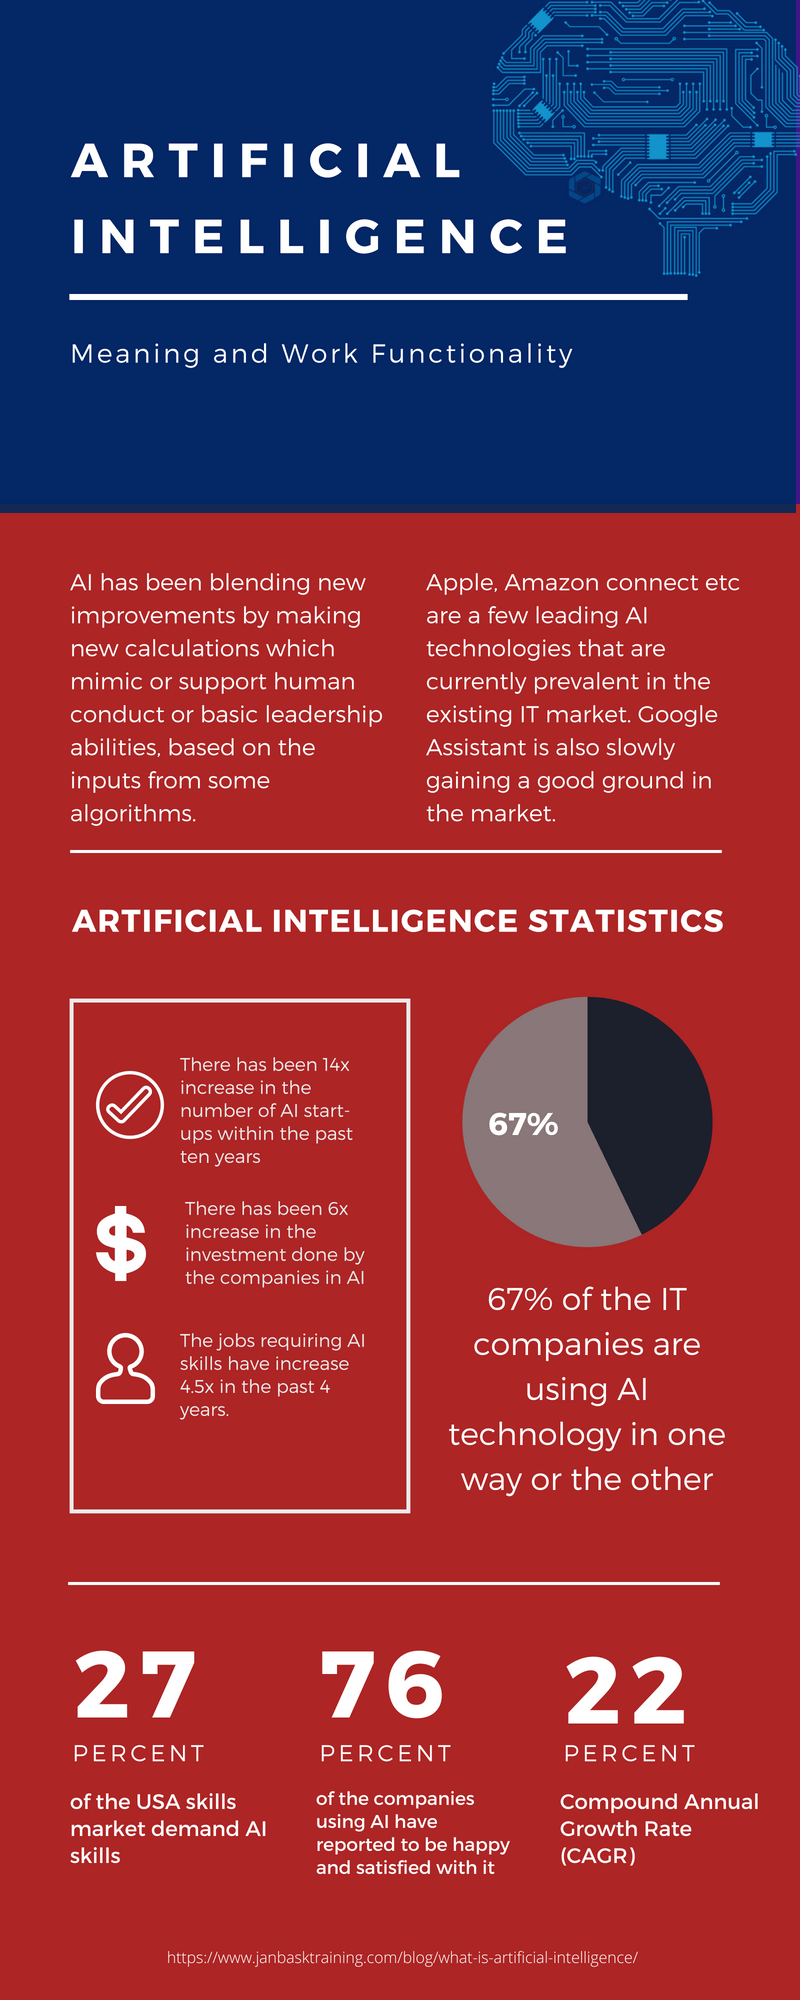 What Is Artificial Intelligence? Infographic